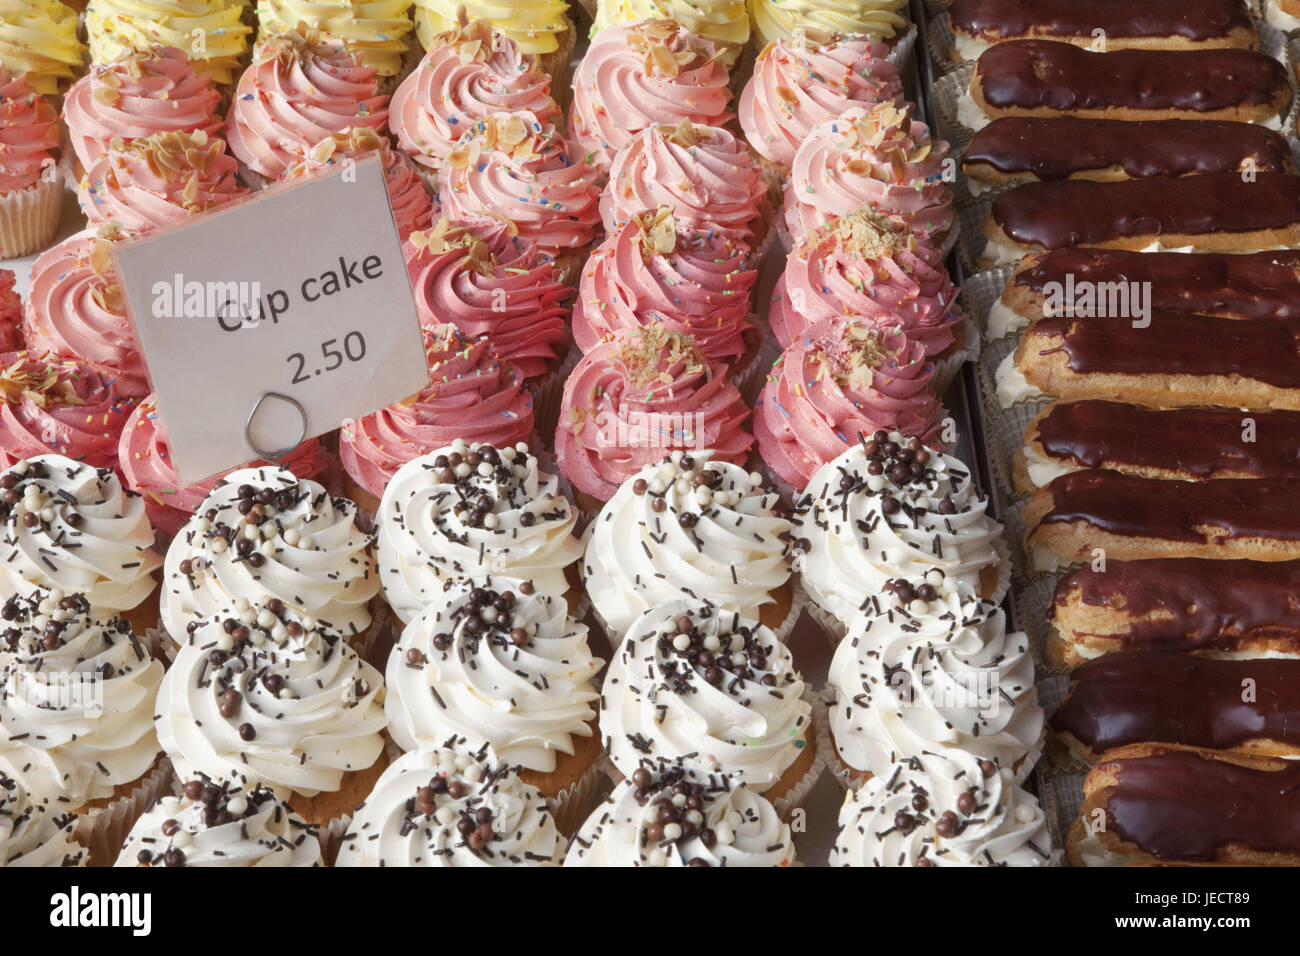 England, London, Southwark, borough Market, cake state, cup Cakes, town, food market, market, state, biscuits, stable, Keckse, cake, dessert, candy, Stock Photo